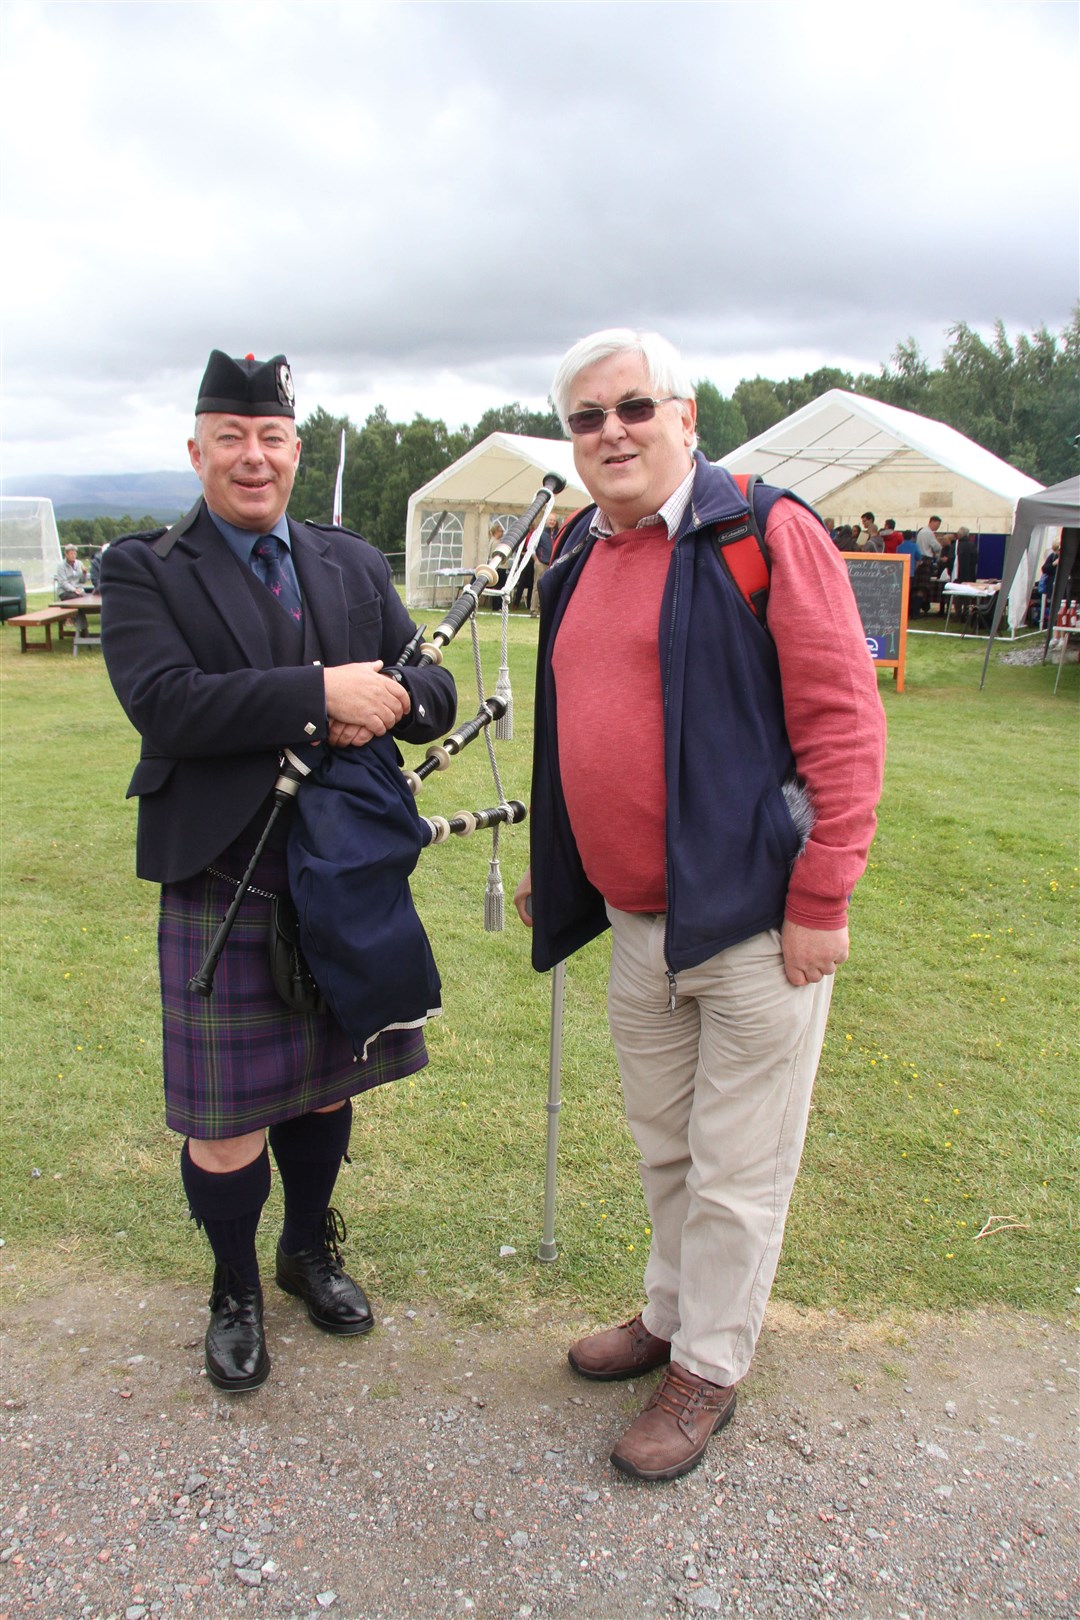 Lewis at work for Speysound, preparing to interview local pipe band leader Chris Thomson at a Badenoch Great Place Project event in 2018 at the Highland Folk Park (Photograph: Frances Porter)